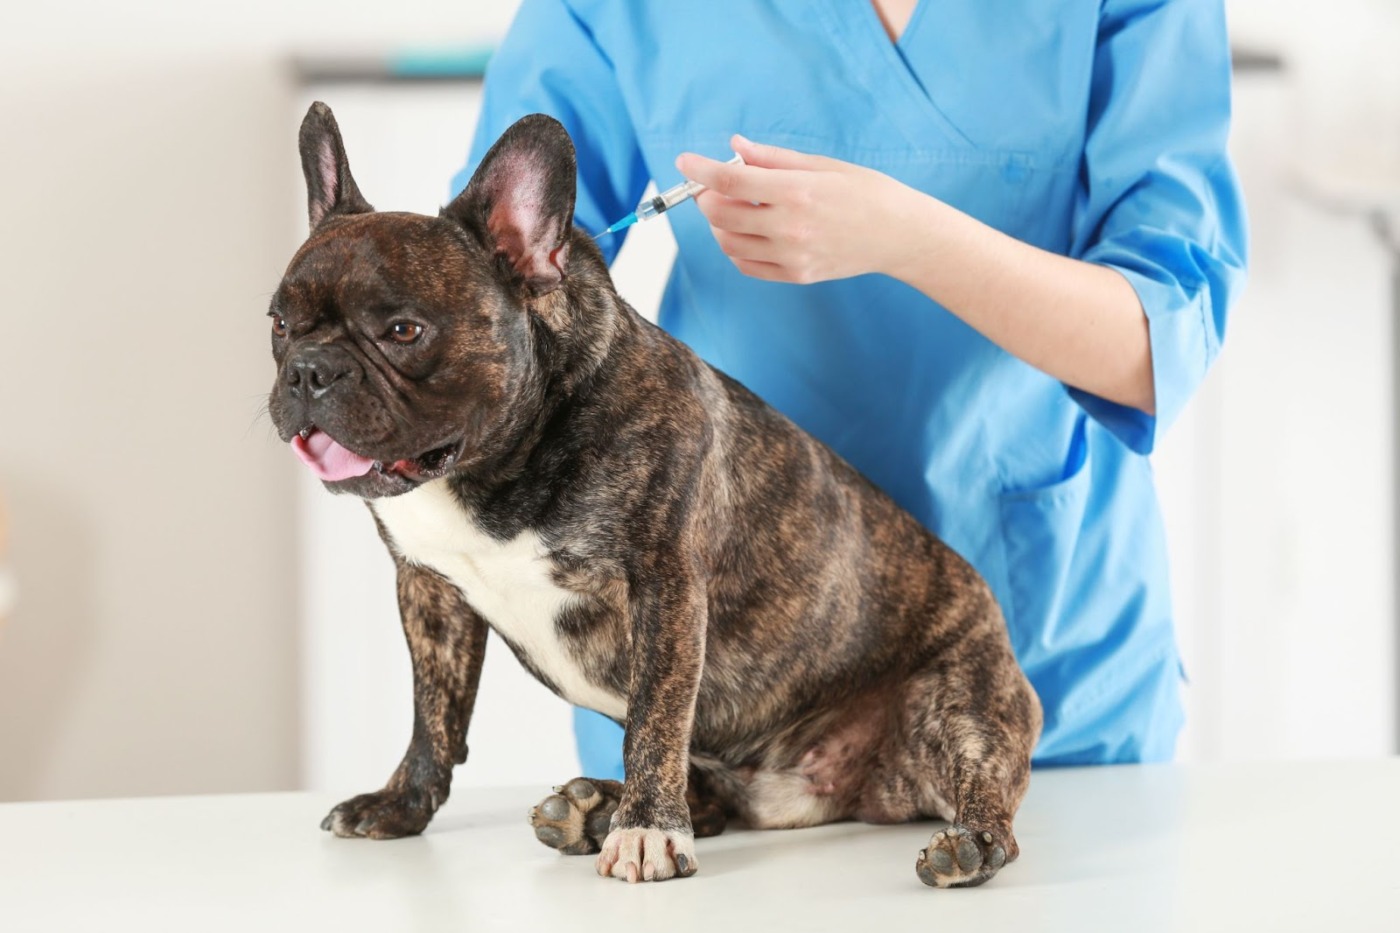 veterinarian injecting a dog the the back neck